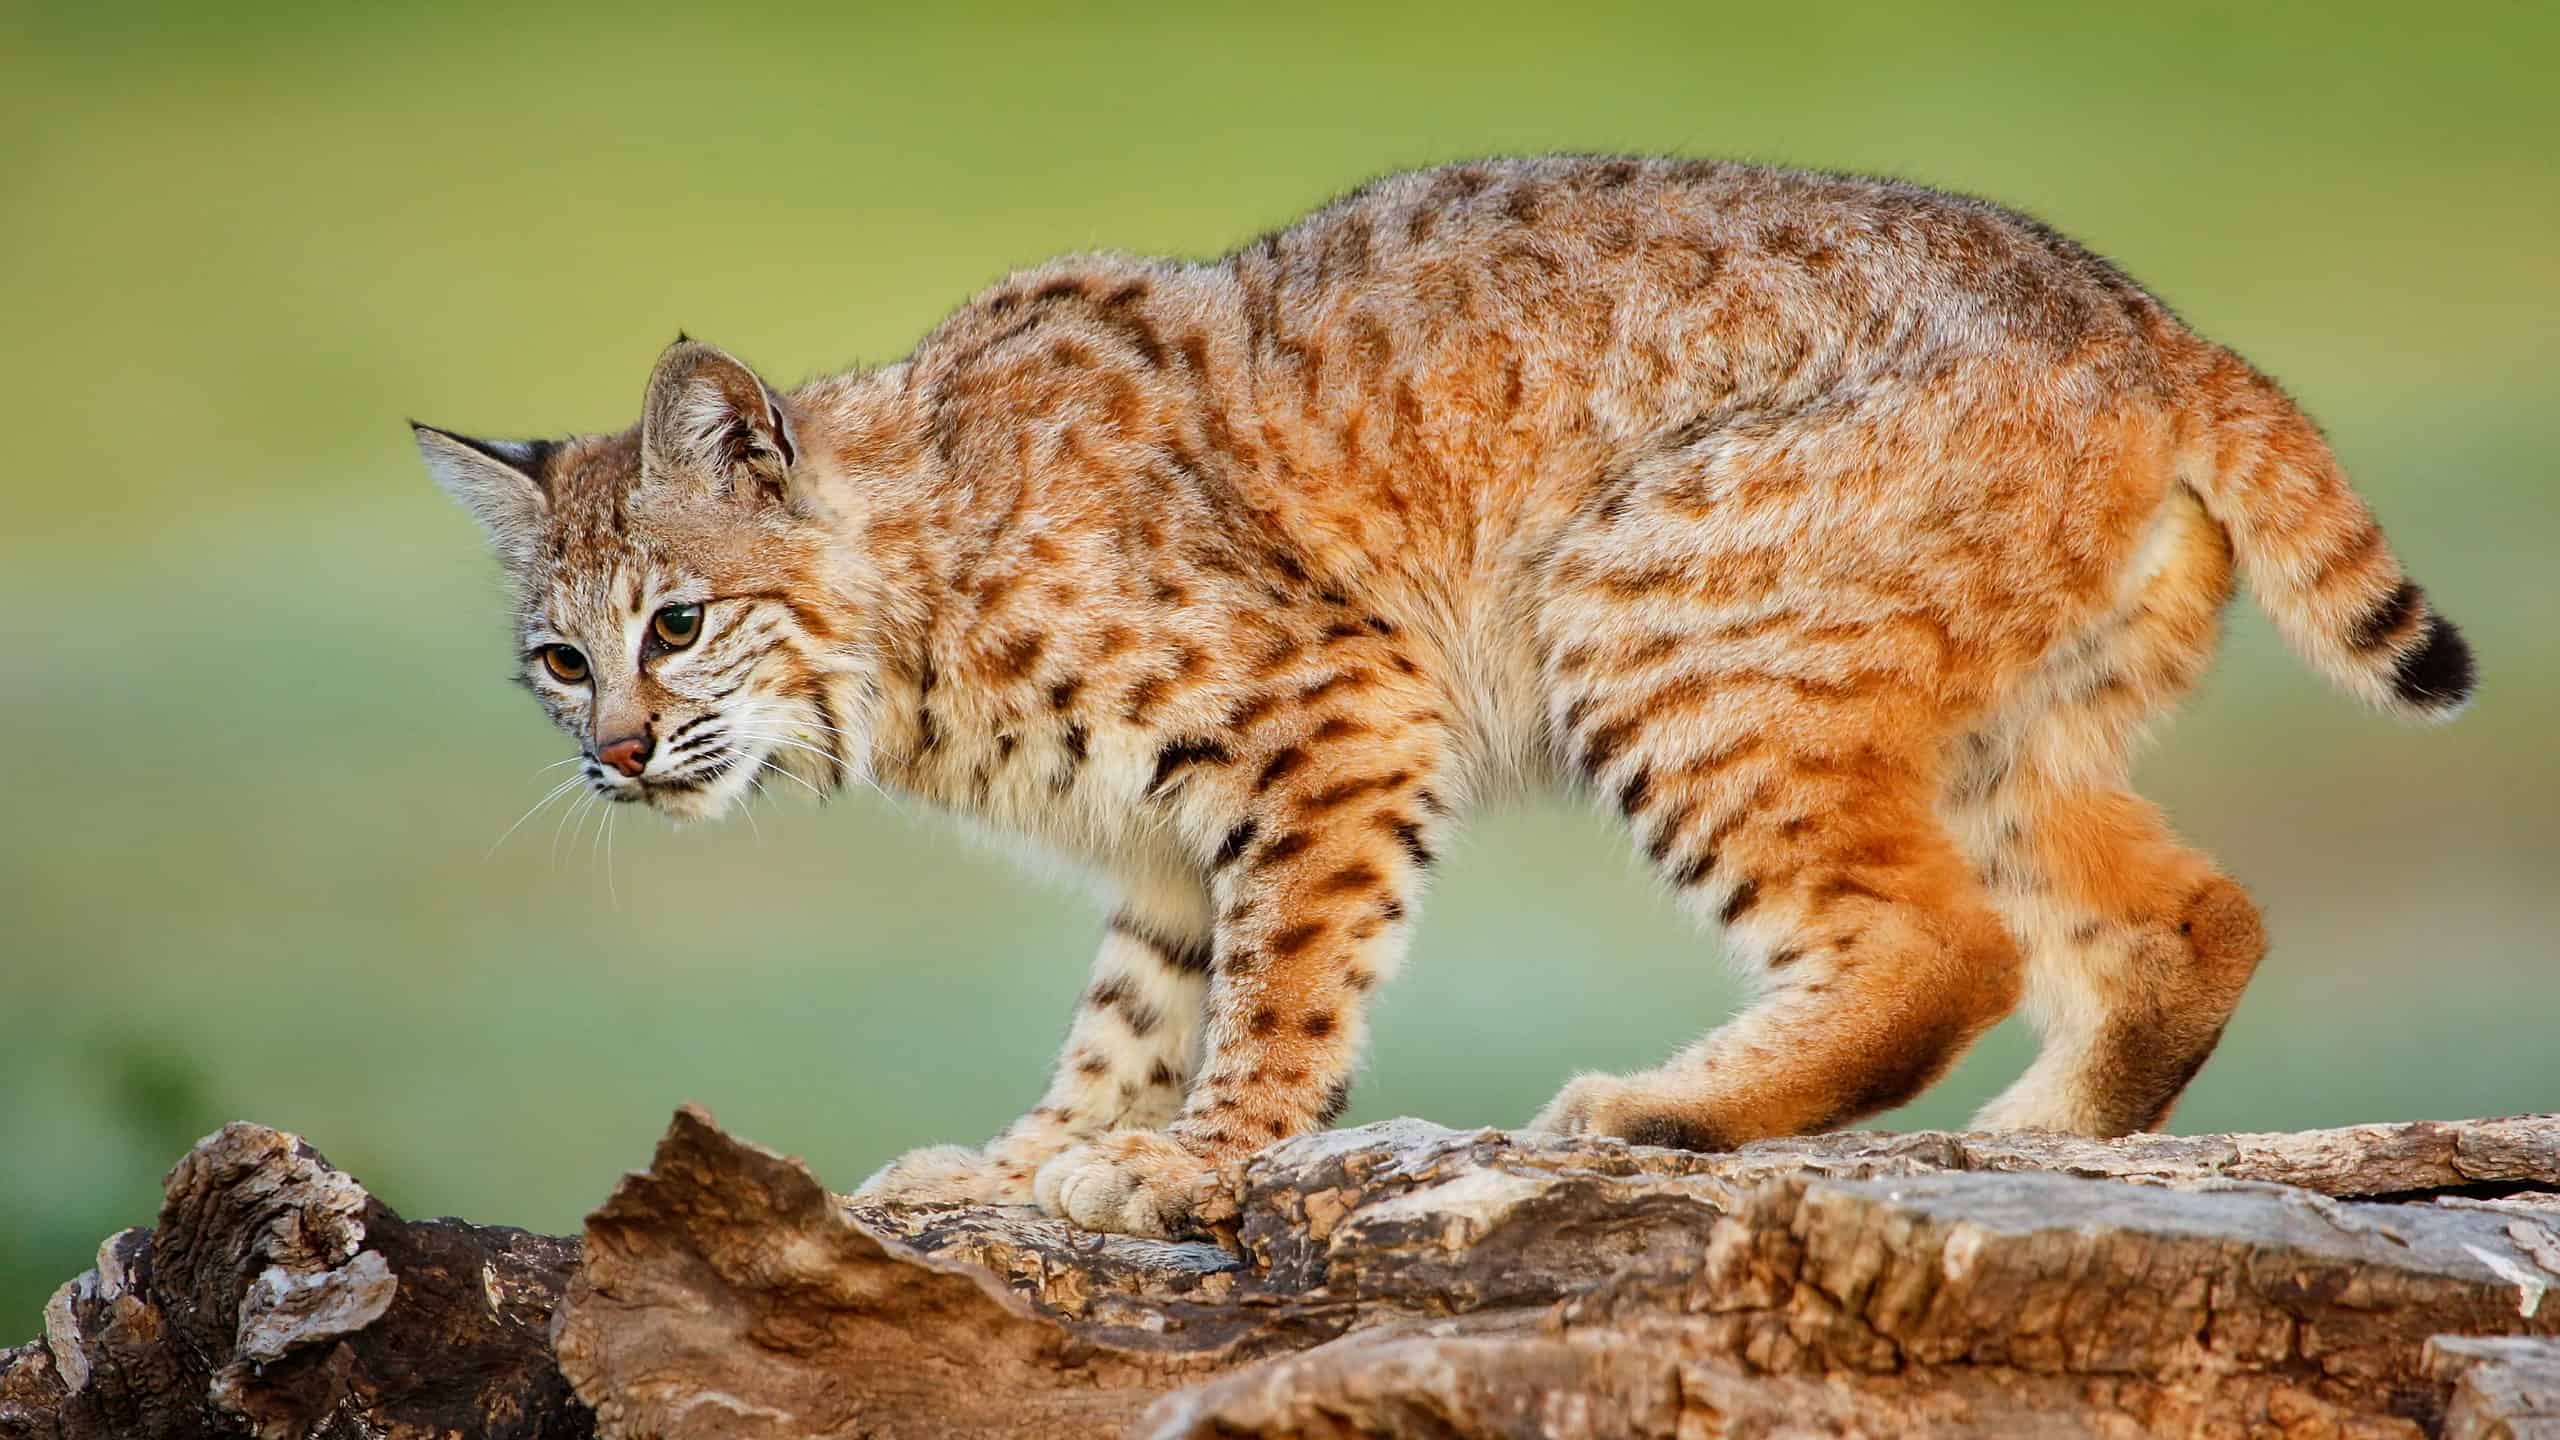 Bobcats in California: How Many Are There and Are They Dangerous